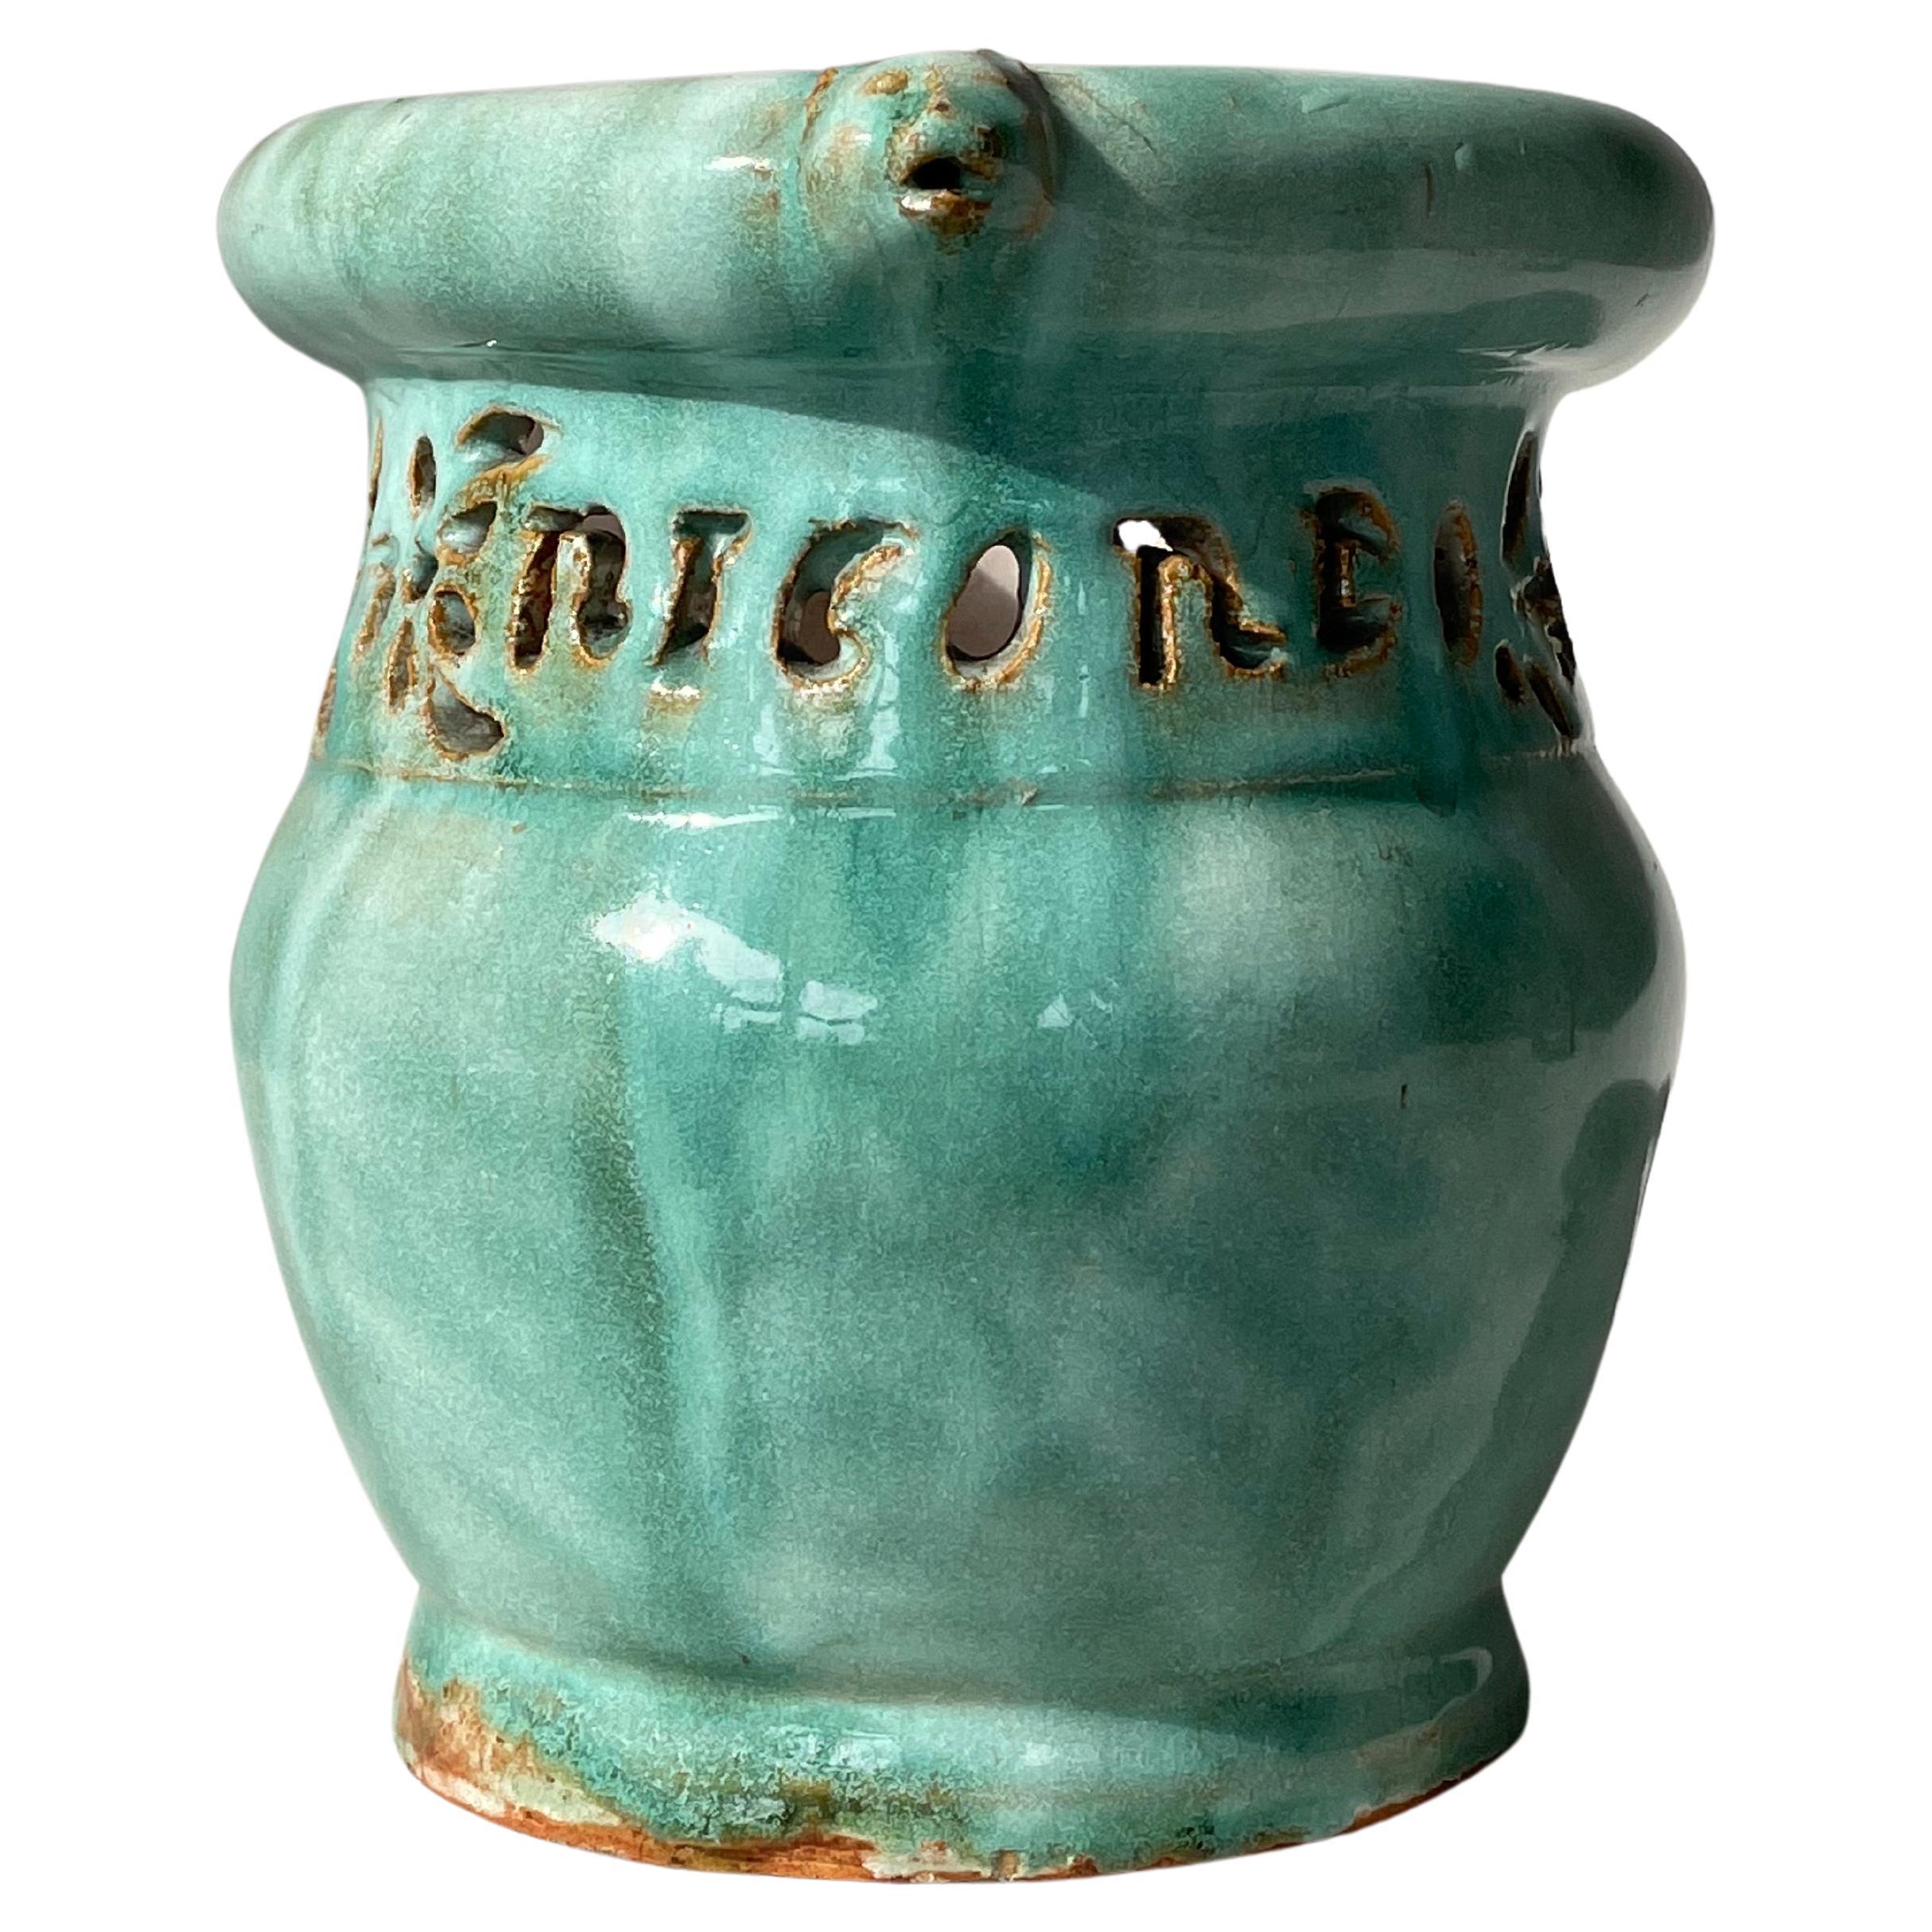 "Ricordo" Vase by Enfield Pottery and Tile For Sale